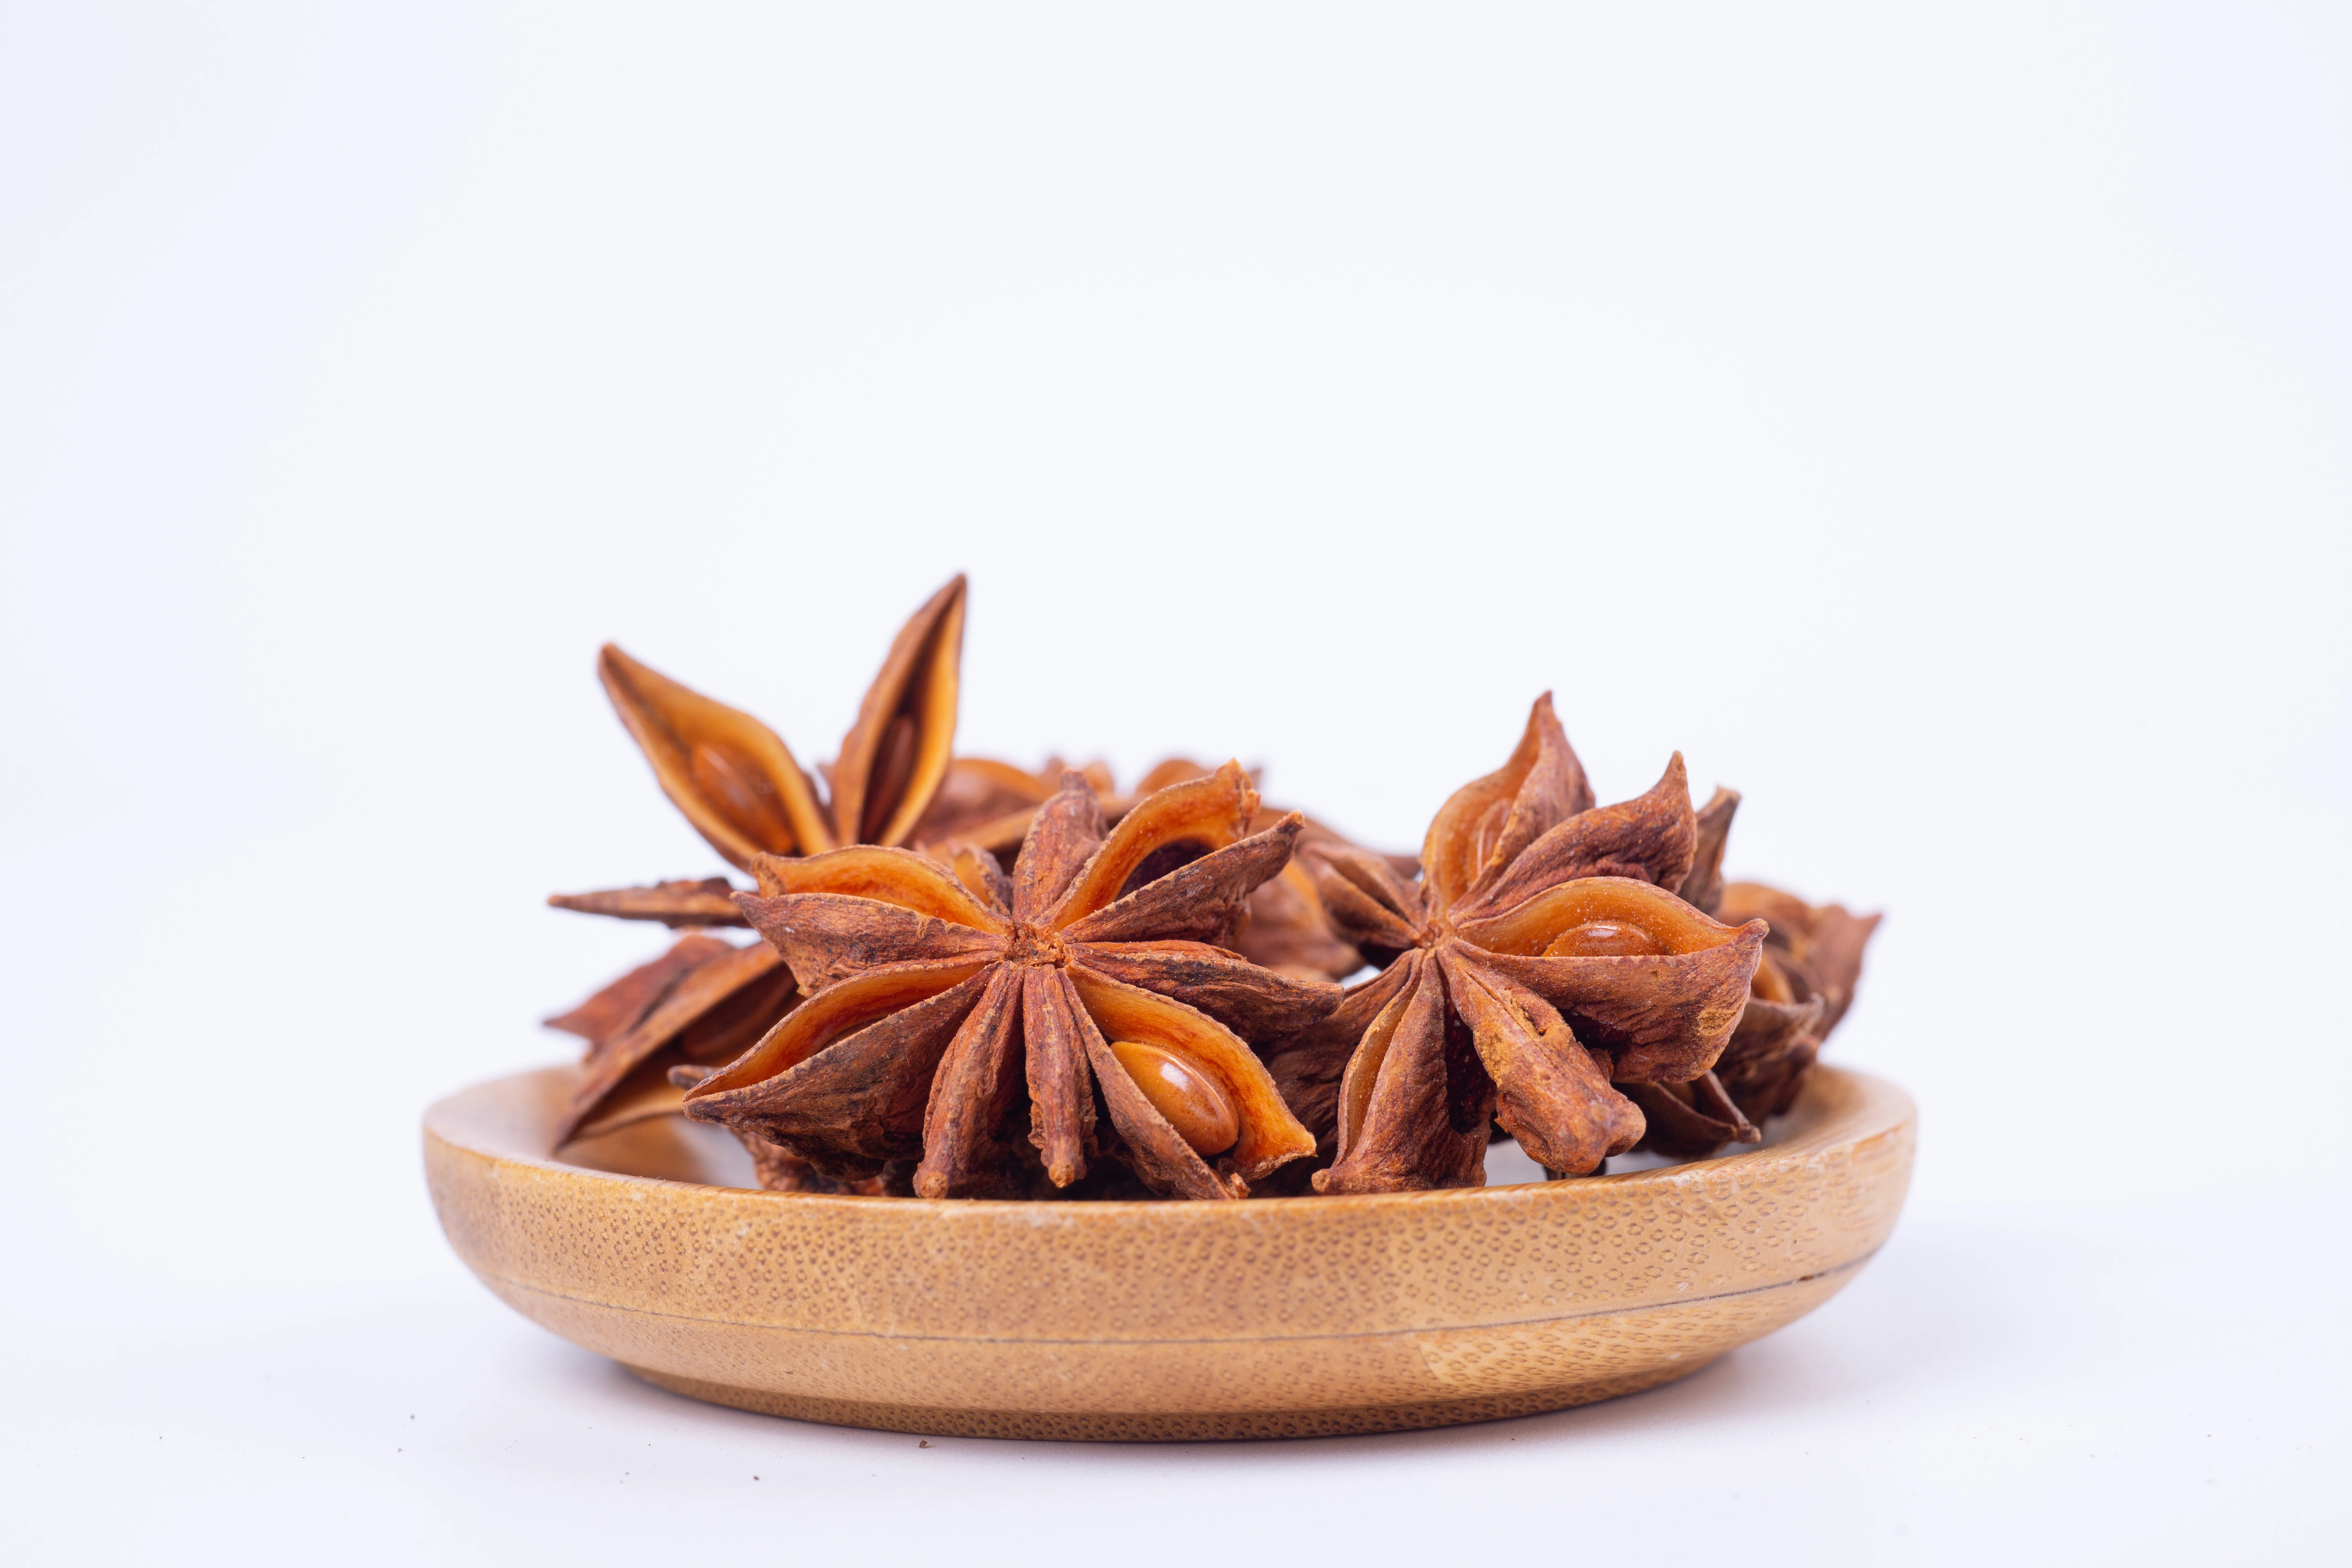 Chinese high quality star anise spice 25g bags of vanilla star anise can be wholesale